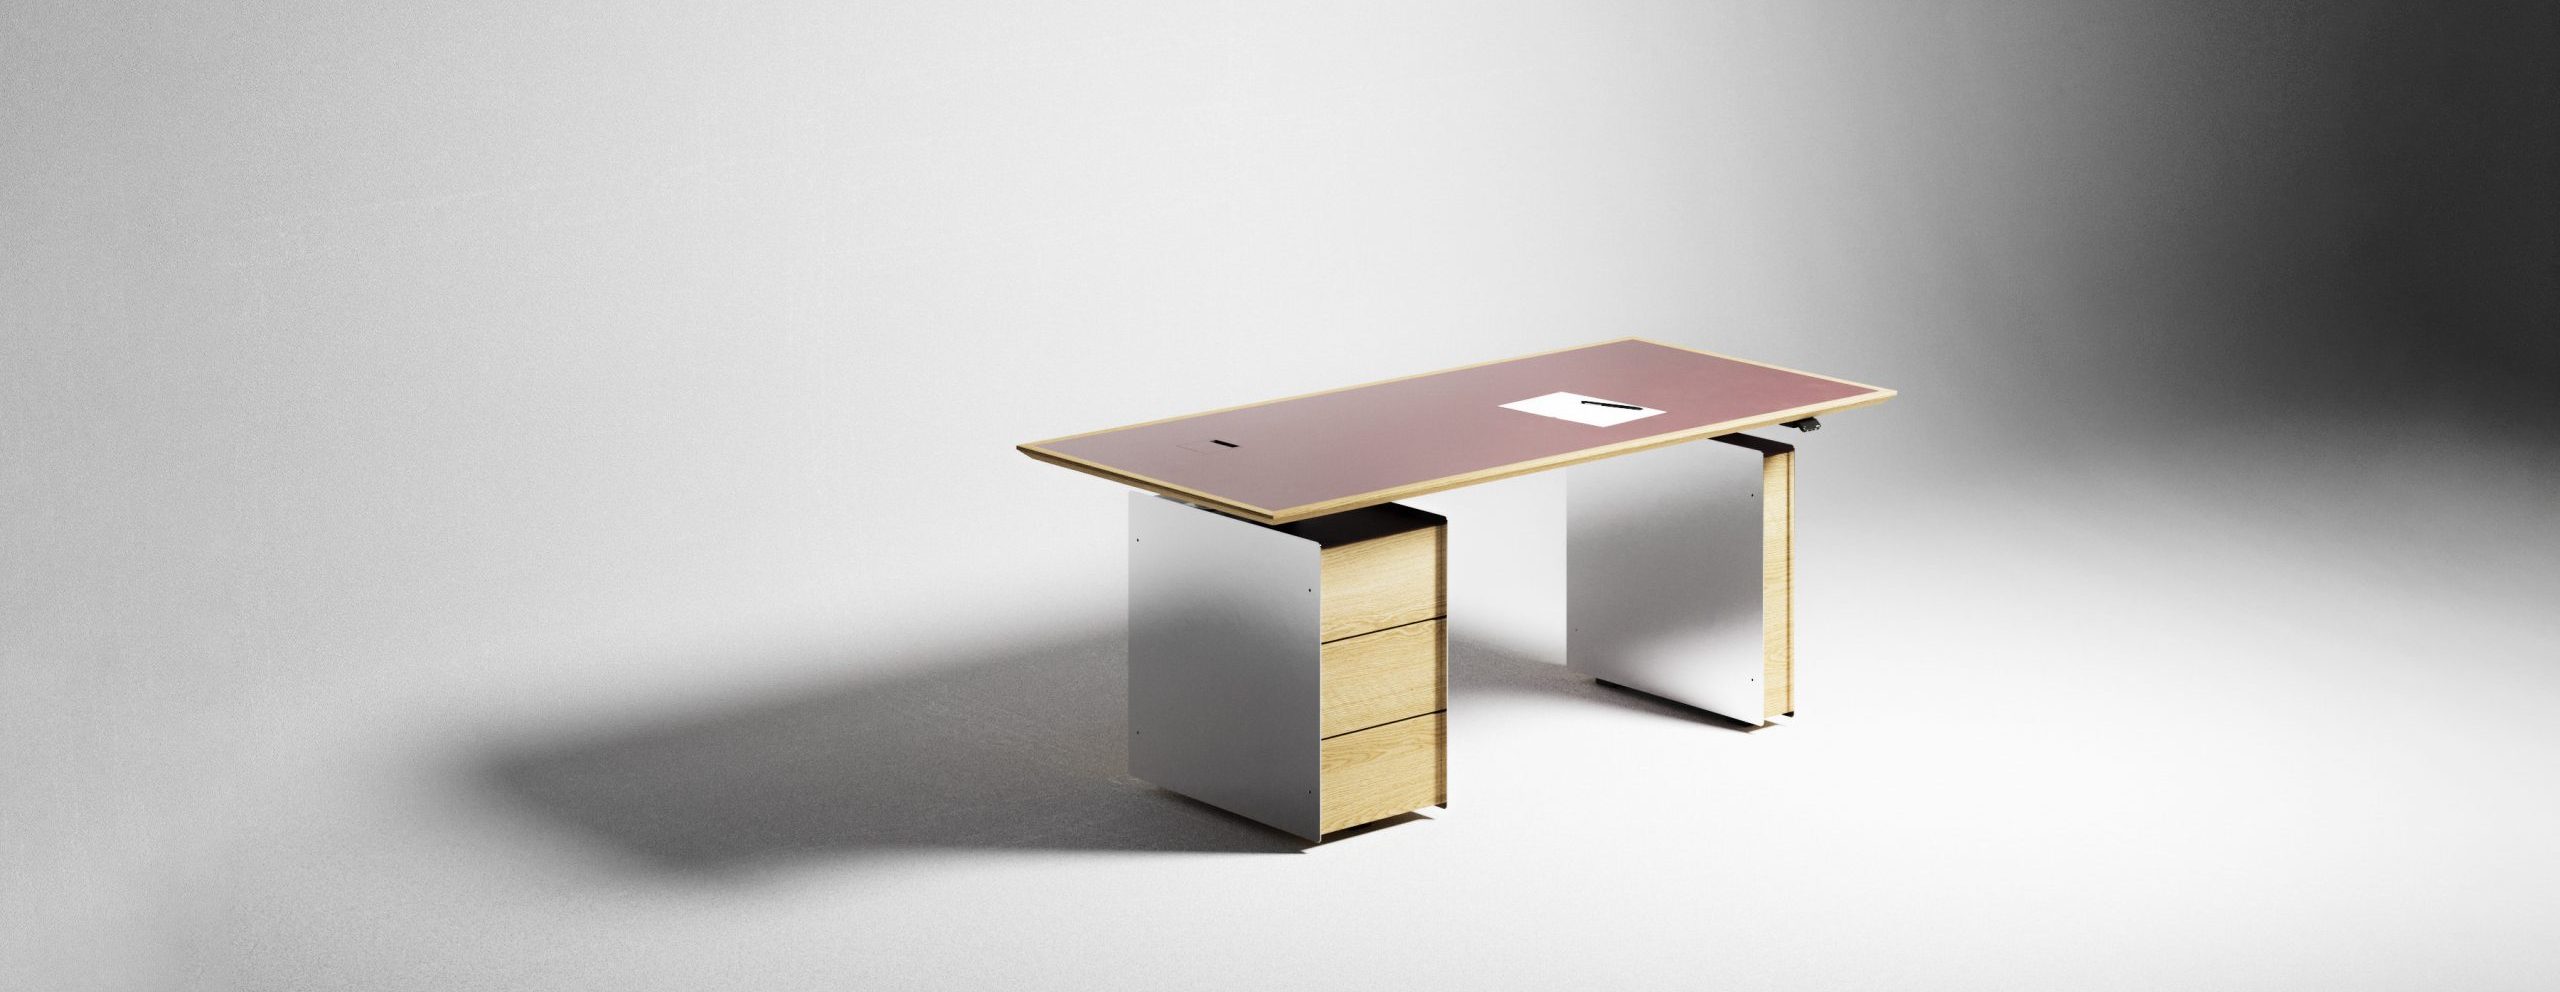 a packshot of a luxury desk in wood metal and vegan leather